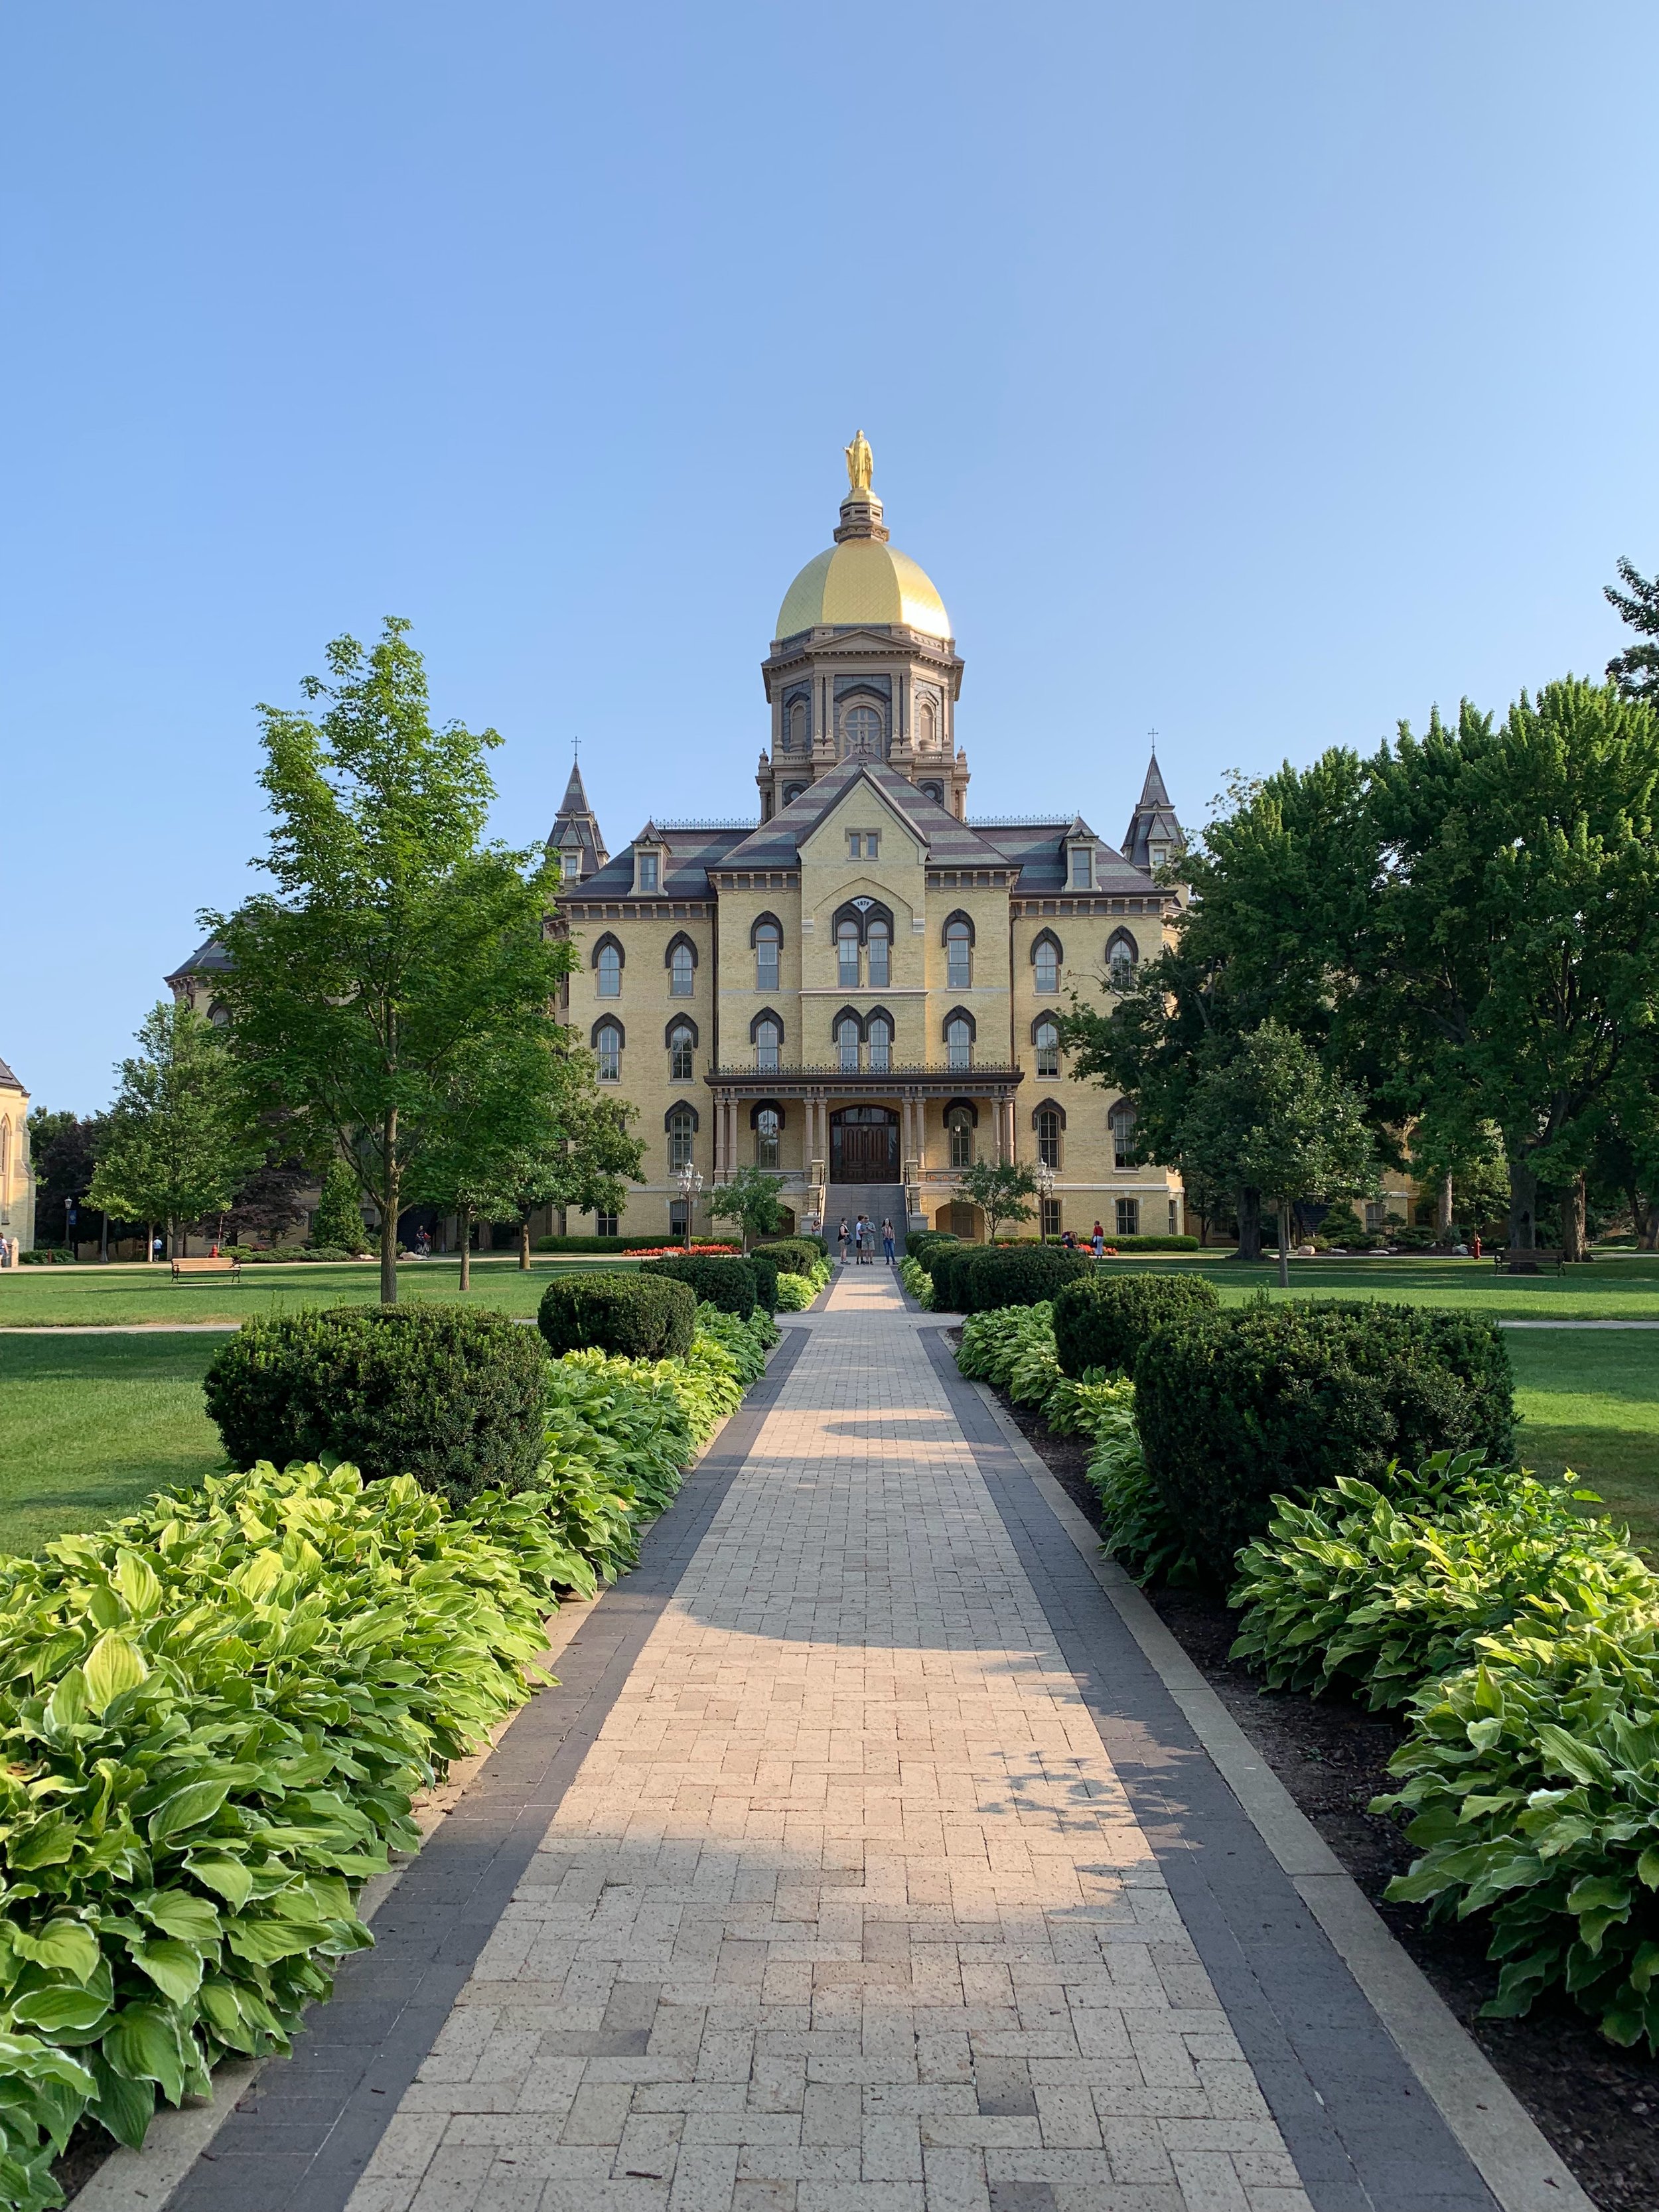 golden-dome-building-university-of-notre-dame-things-to-do-in-indiana